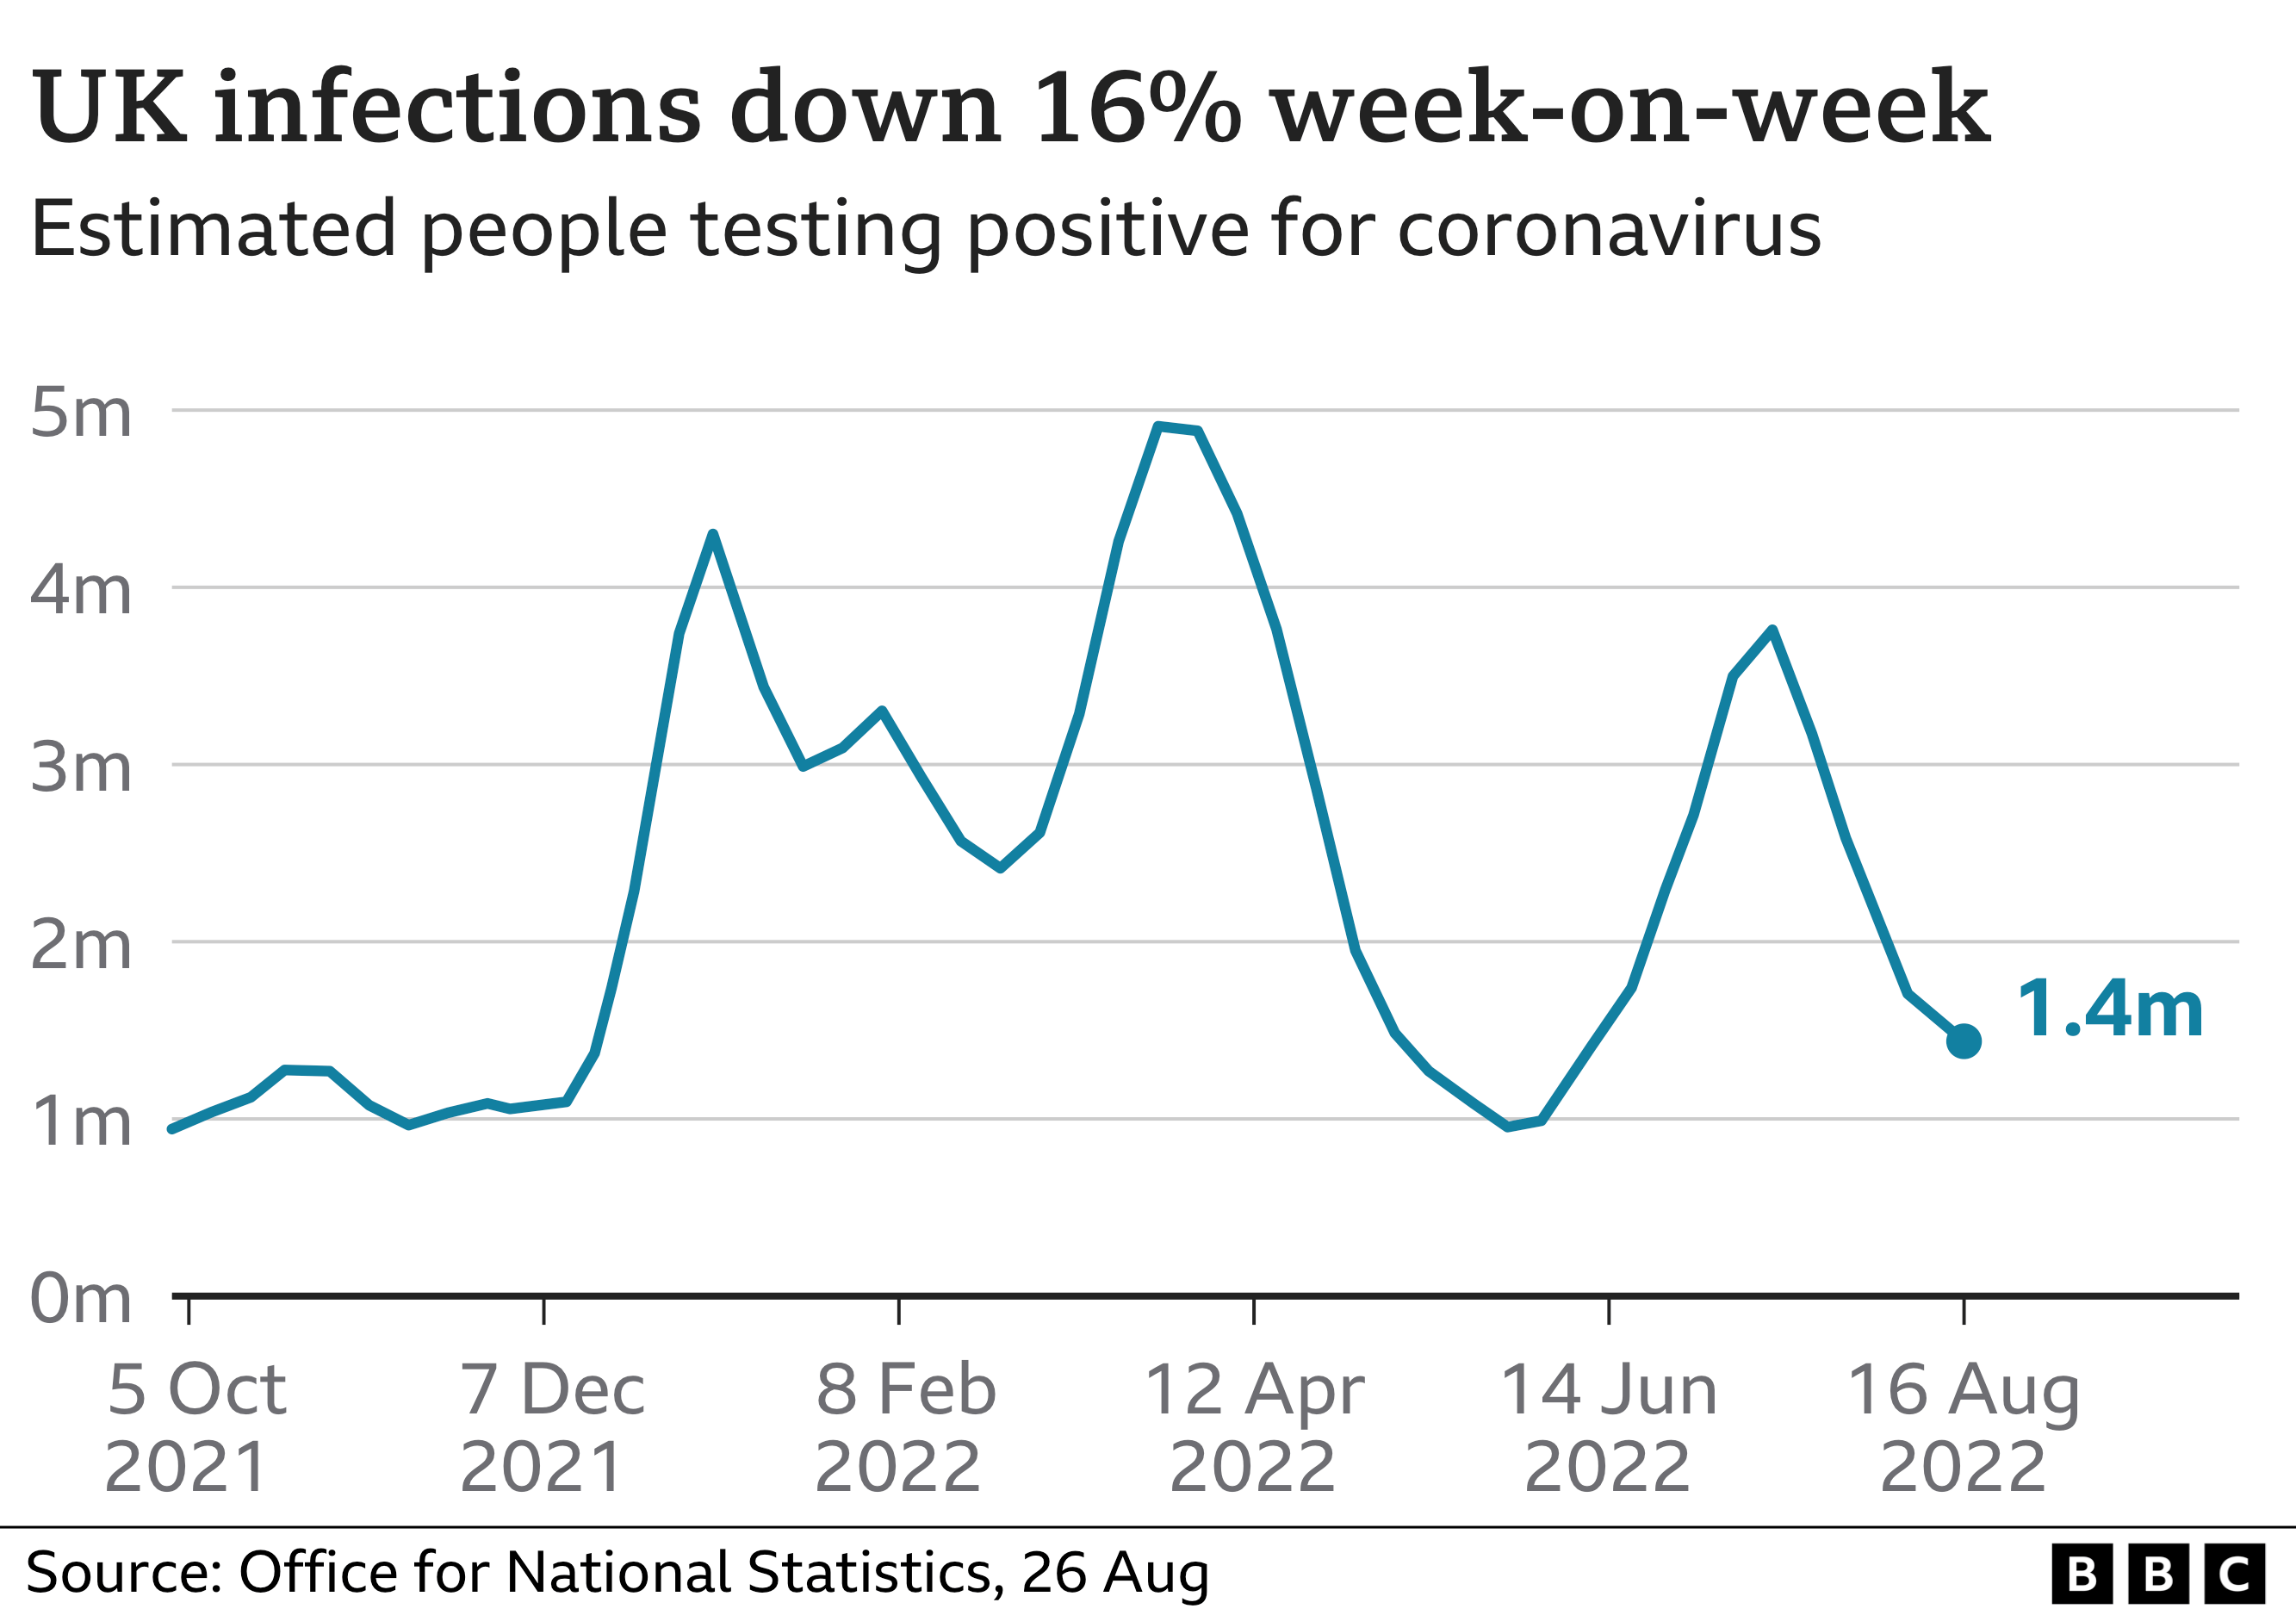 UK infections down by 16%